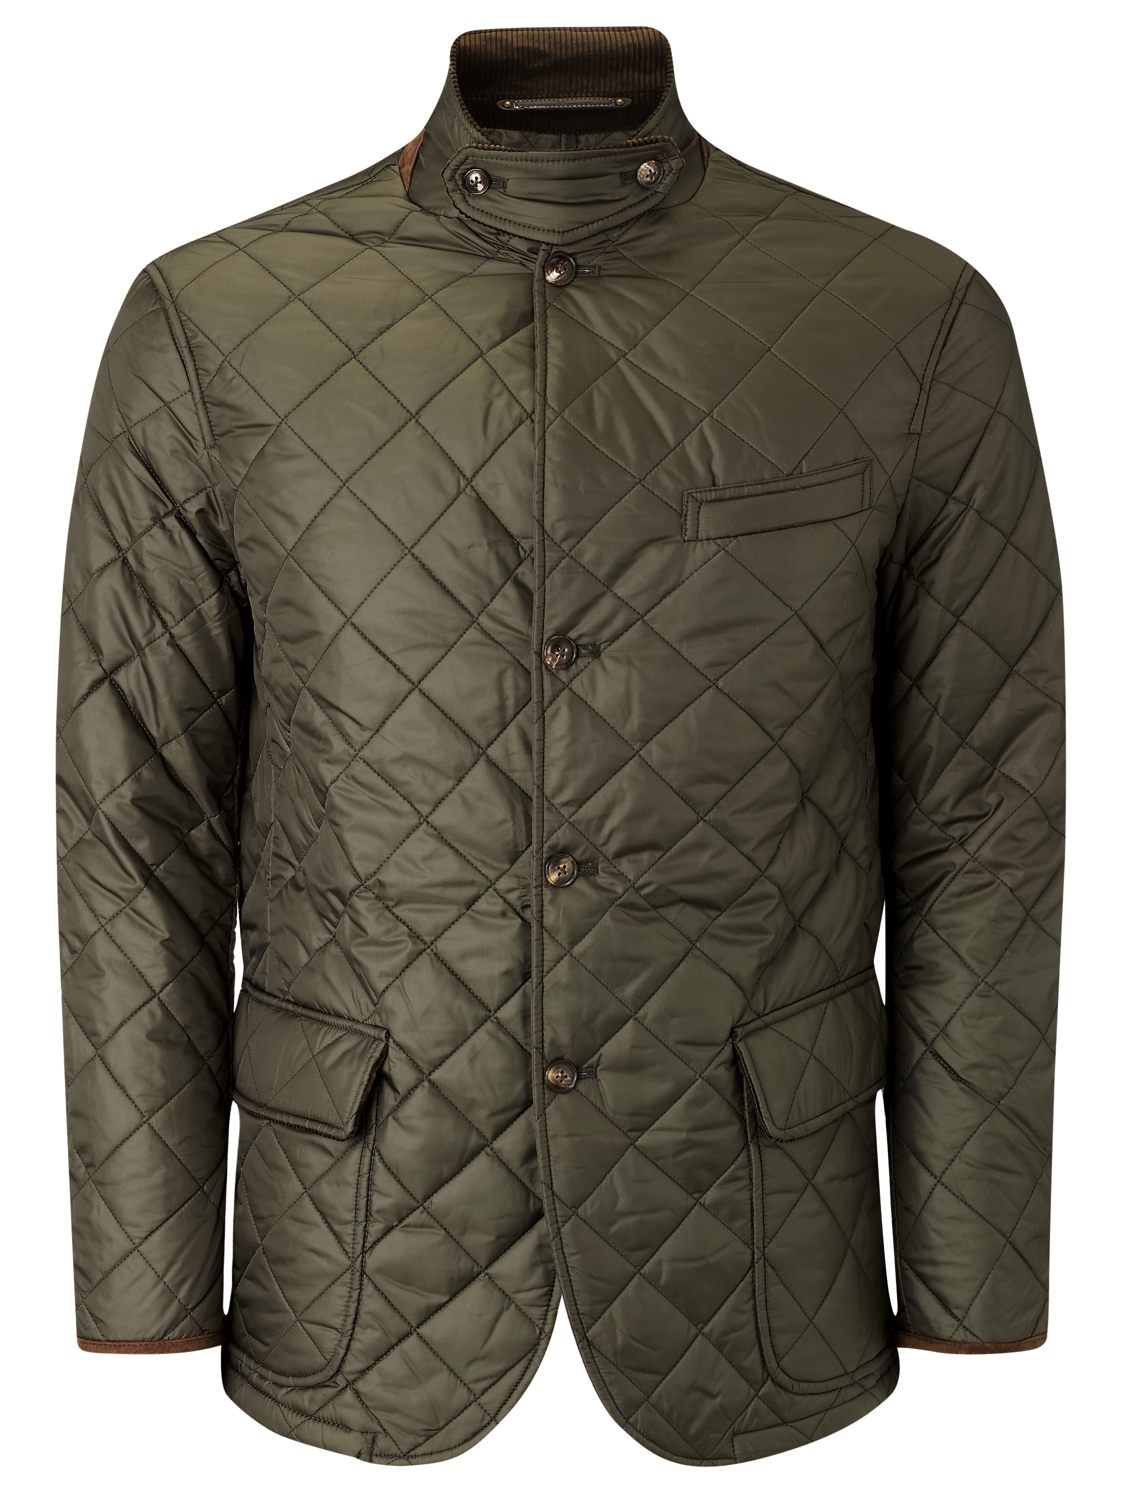 Polo Ralph Lauren Quilted Sport Jacket Olive in Green for Men - Lyst